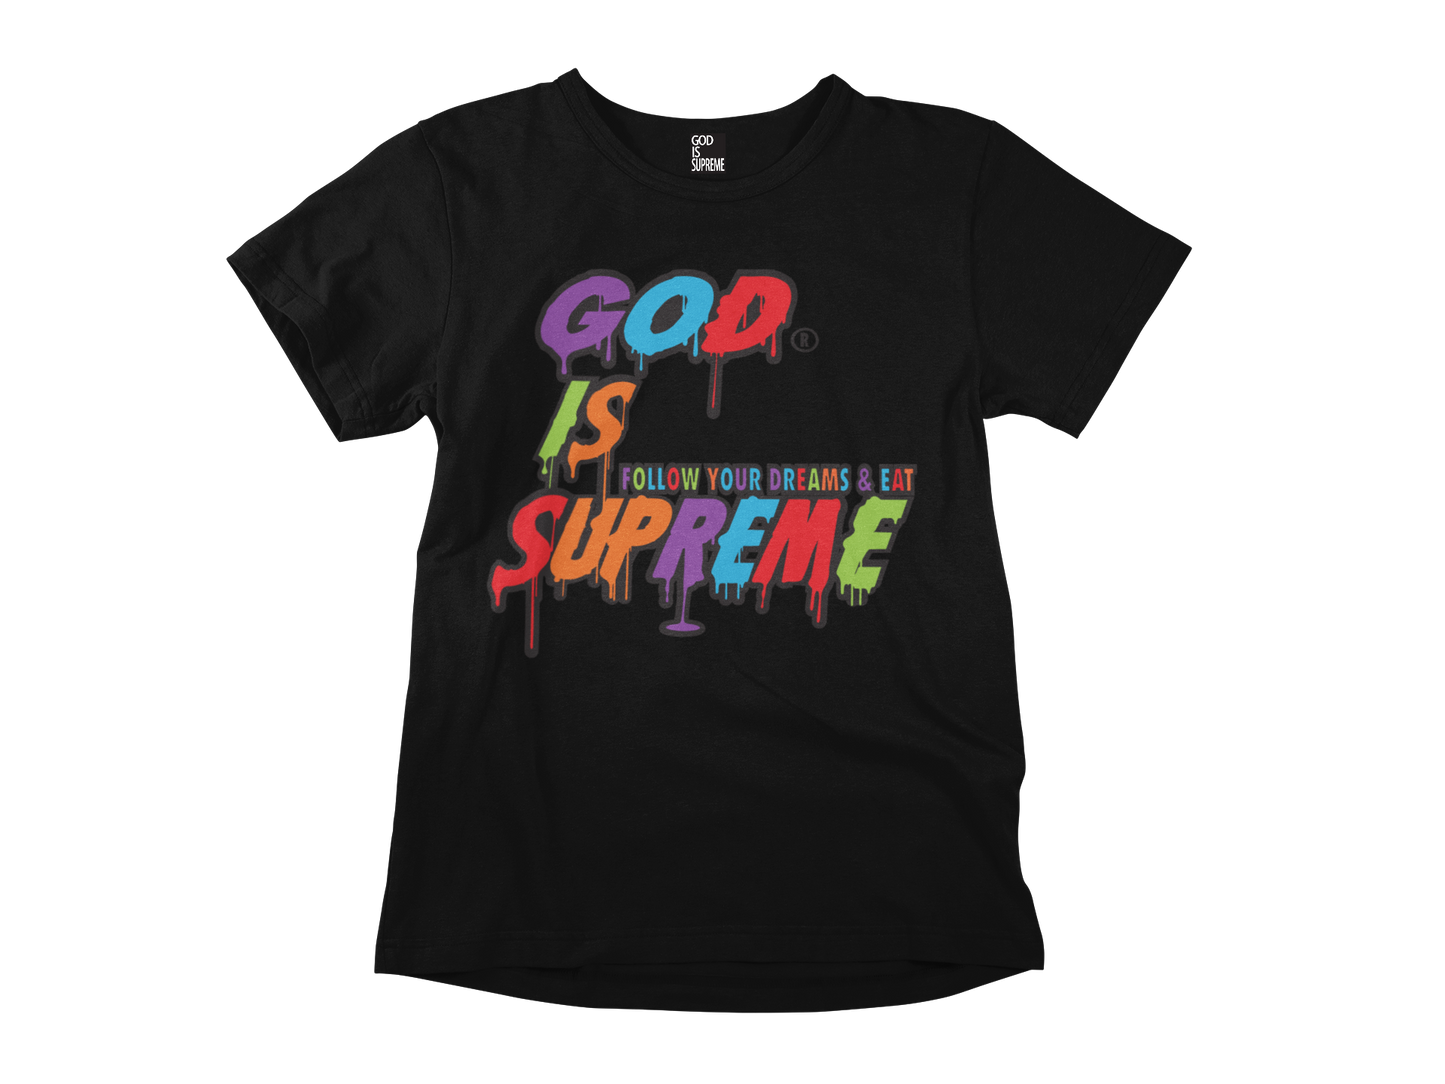 Color Drip God is Supreme / White T-shirt